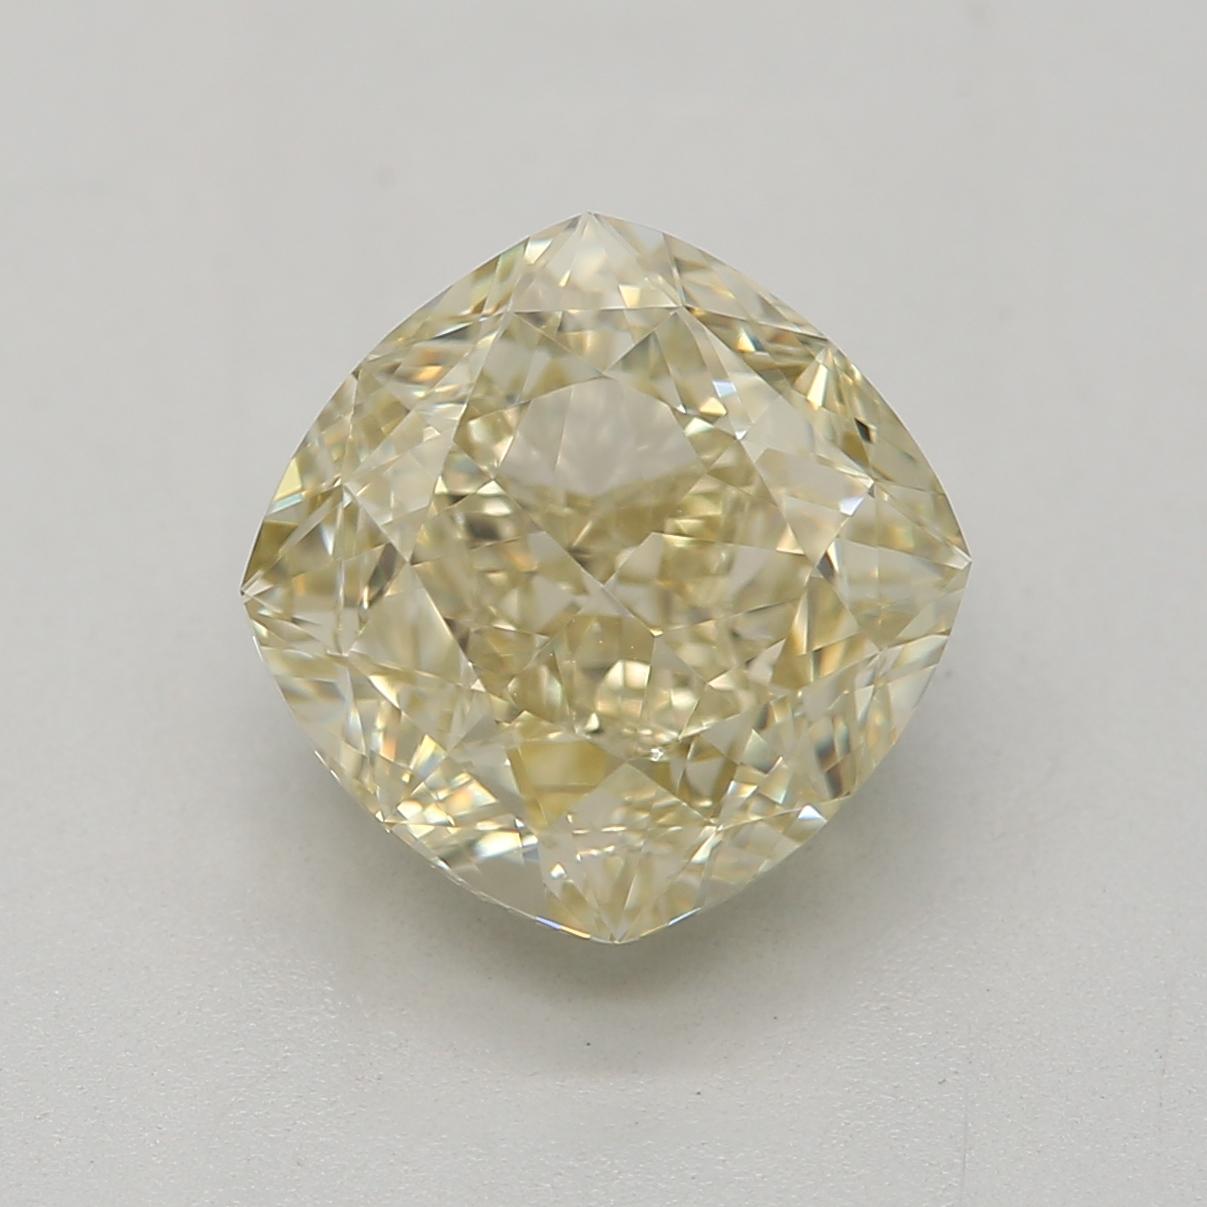 *100% NATURAL FANCY COLOUR DIAMOND*

✪ Diamond Details ✪

➛ Shape: Cushion
➛ Colour Grade: Fancy Light Brownish Greenish Yellow
➛ Carat: 2.01
➛ Clarity: VS1
➛ GIA Certified 

^FEATURES OF THE DIAMOND^

Our 2.01 carat diamond is a precious gemstone